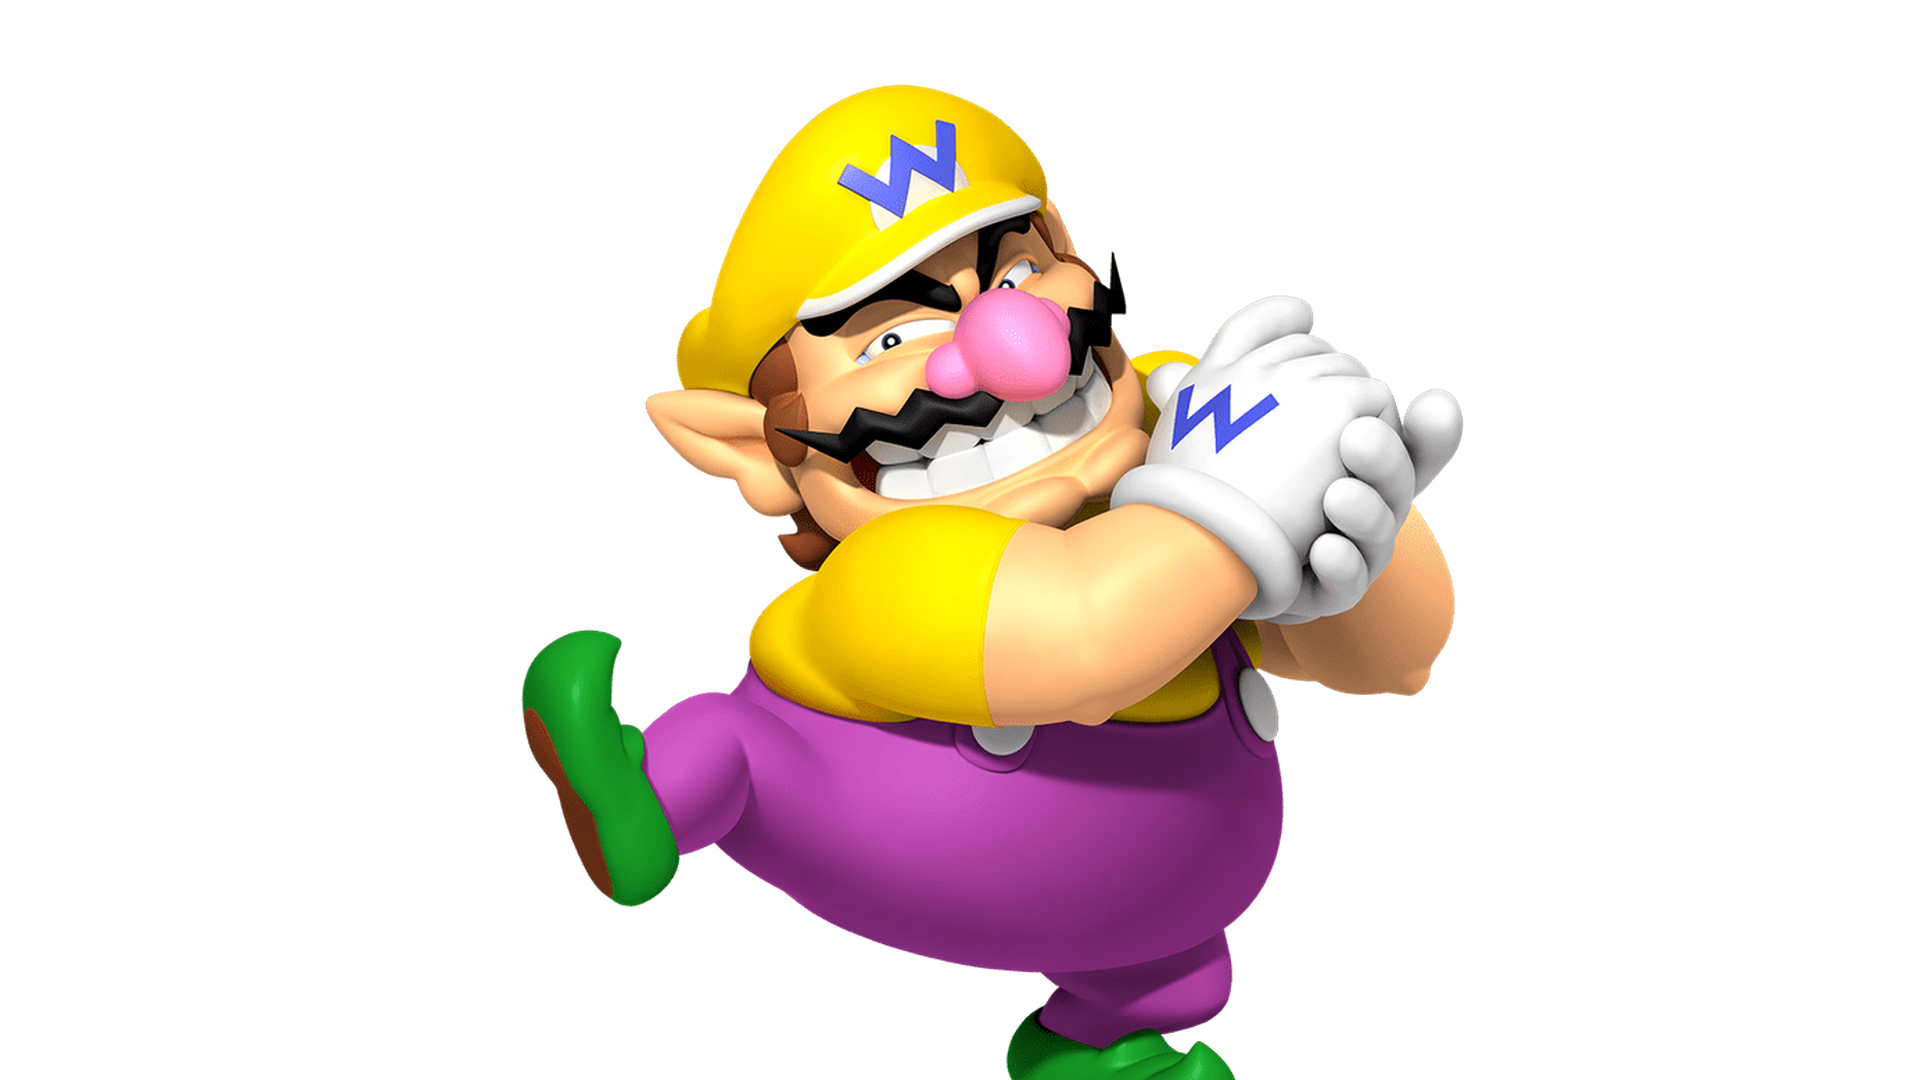 An image of Wario